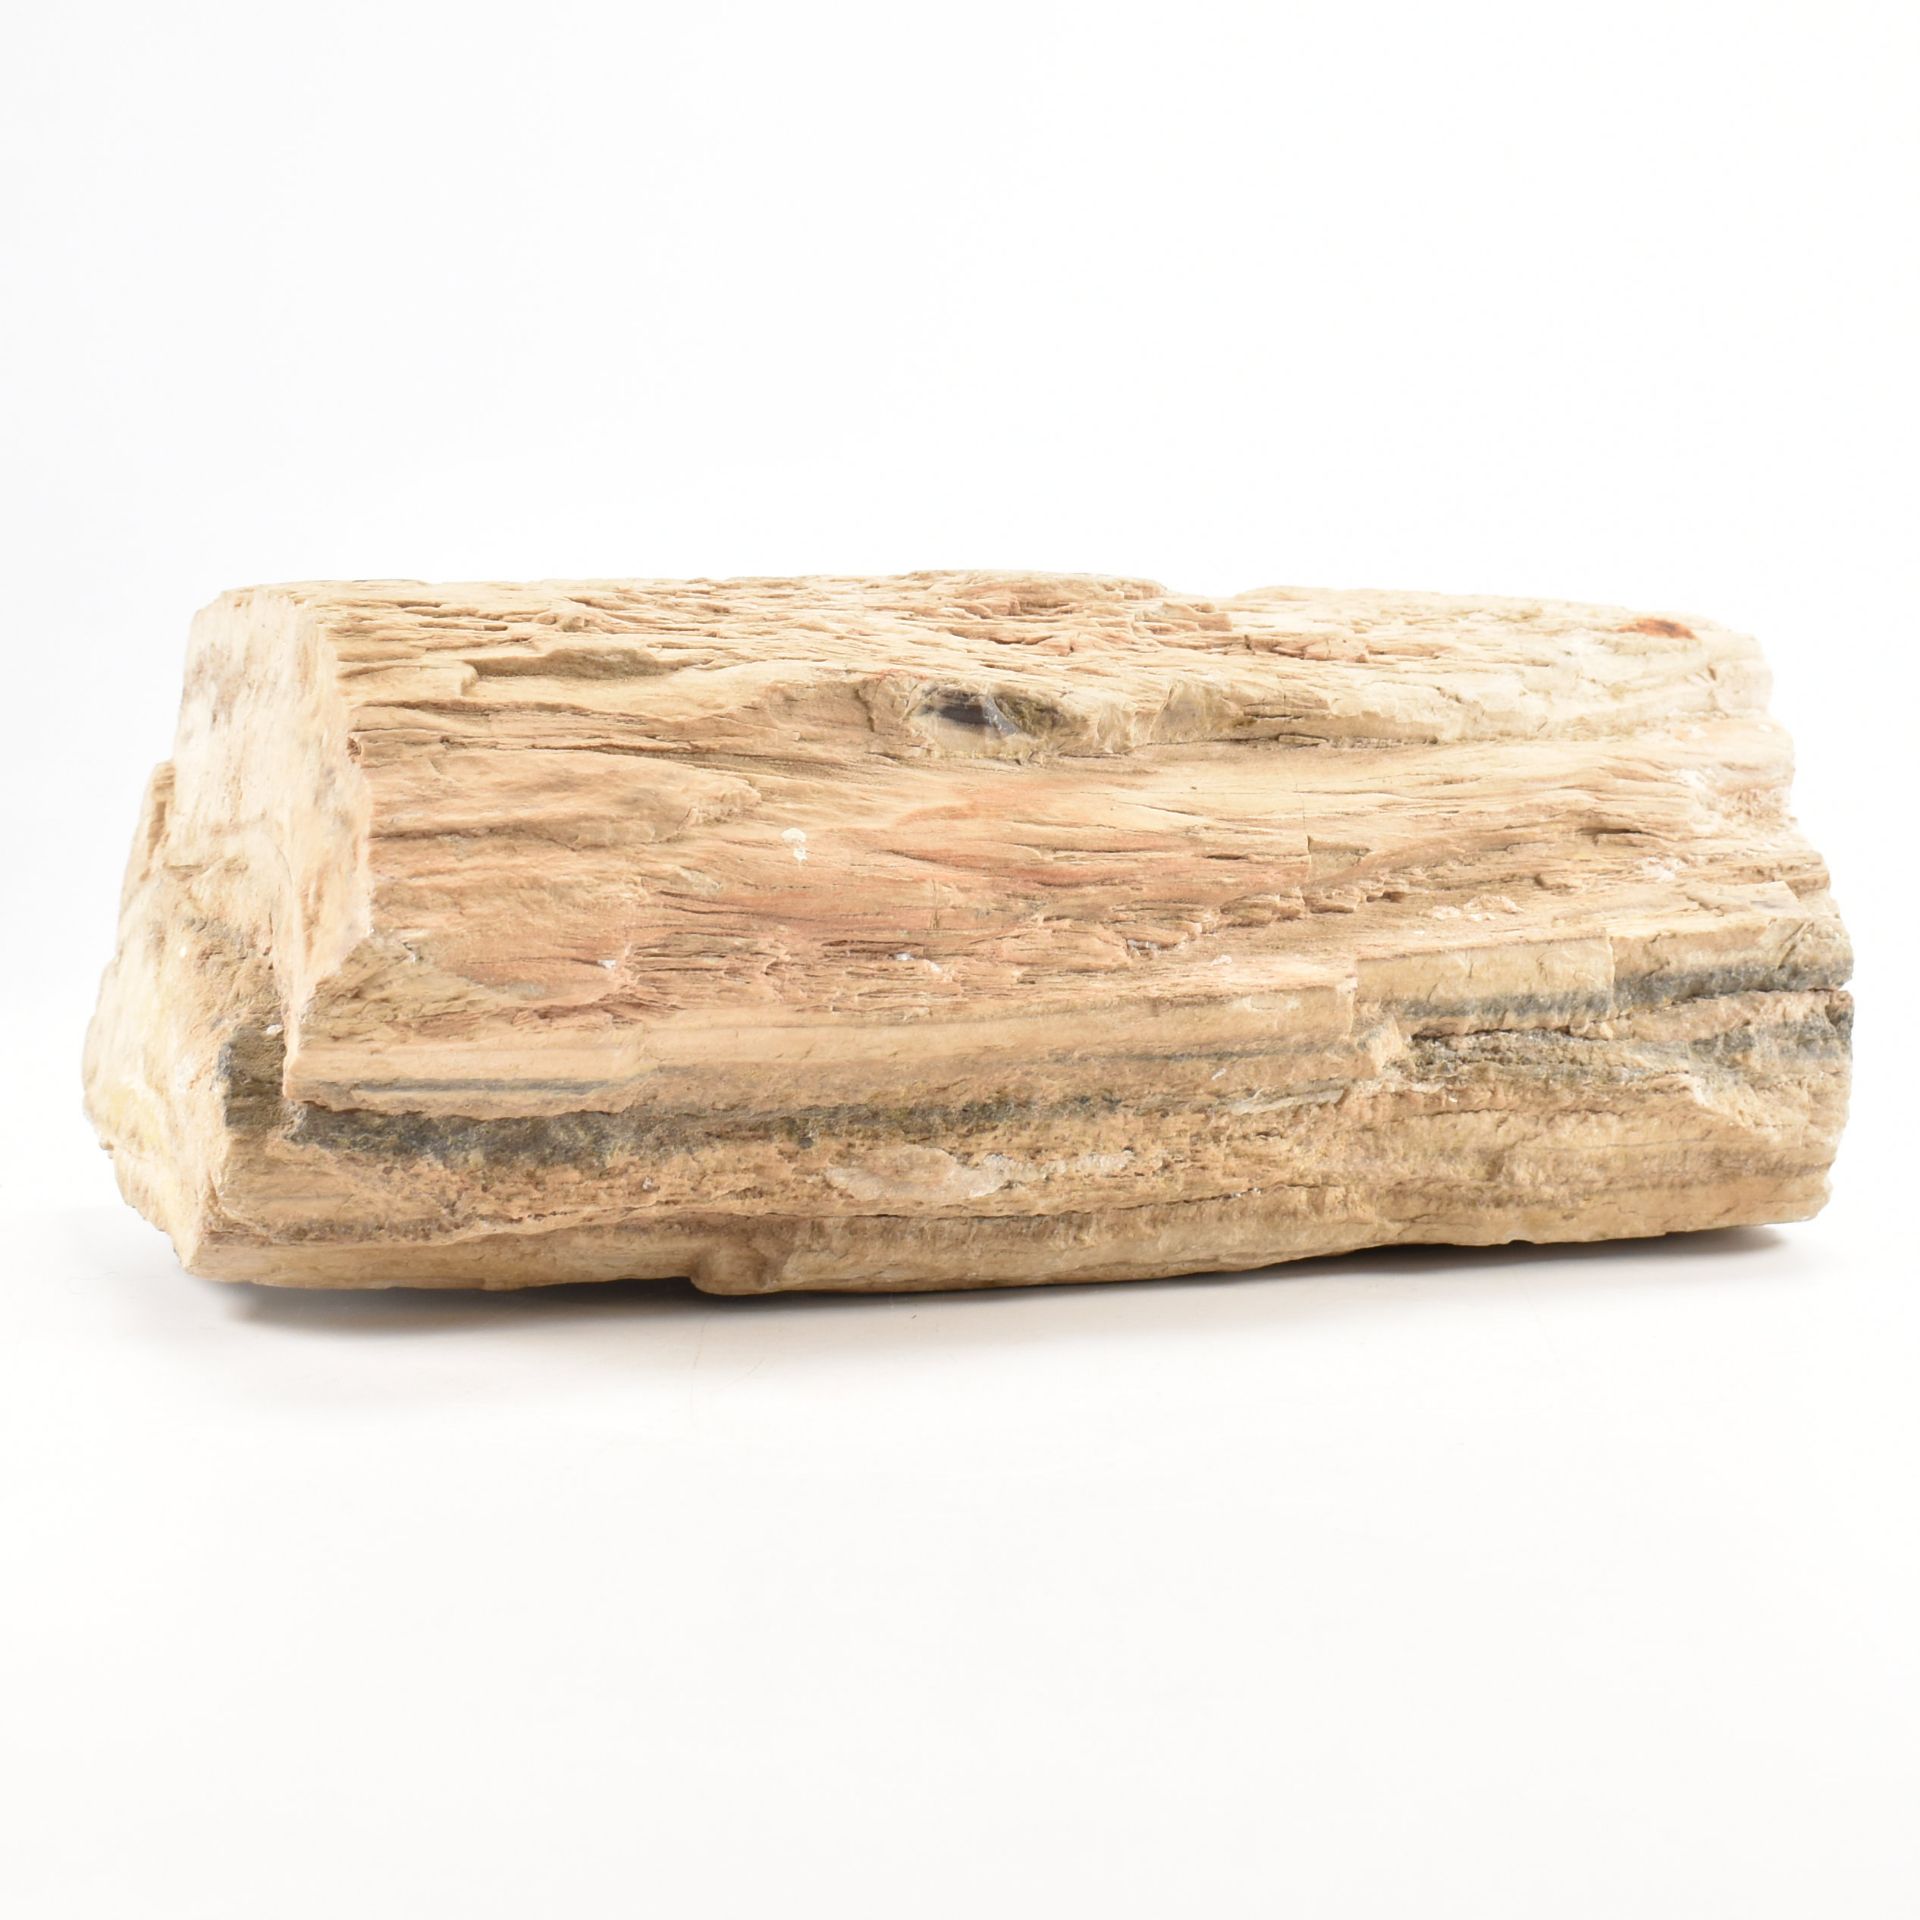 NATURAL HISTORY - PETRIFIED WOOD MINERAL SPECIMEN